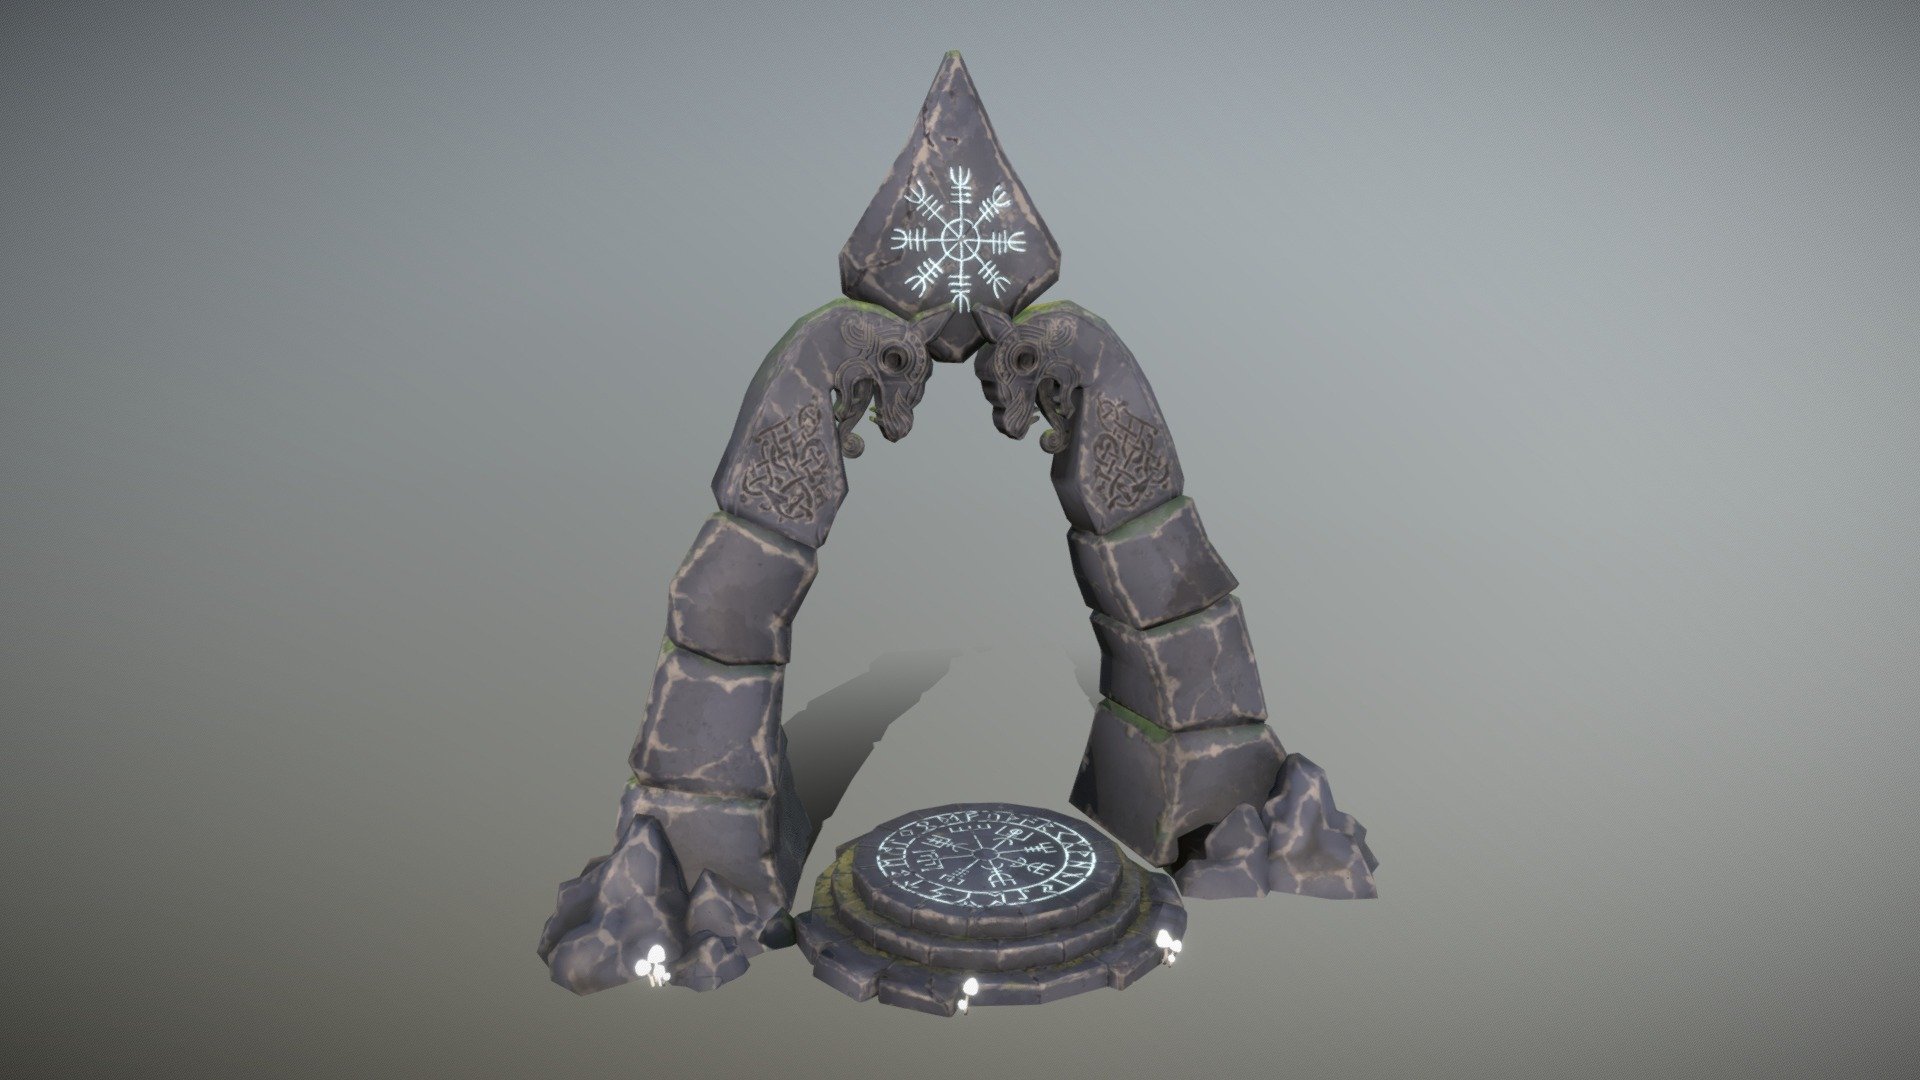 So happy to post on Sketchfab for the first time! 
Here's a game ready model I made for an assesment test for a 3d modeler job position. Hear ye, hear ye - I got the job!

The runes ingraved in stone are Viking runes - &ldquo;The helm of awe